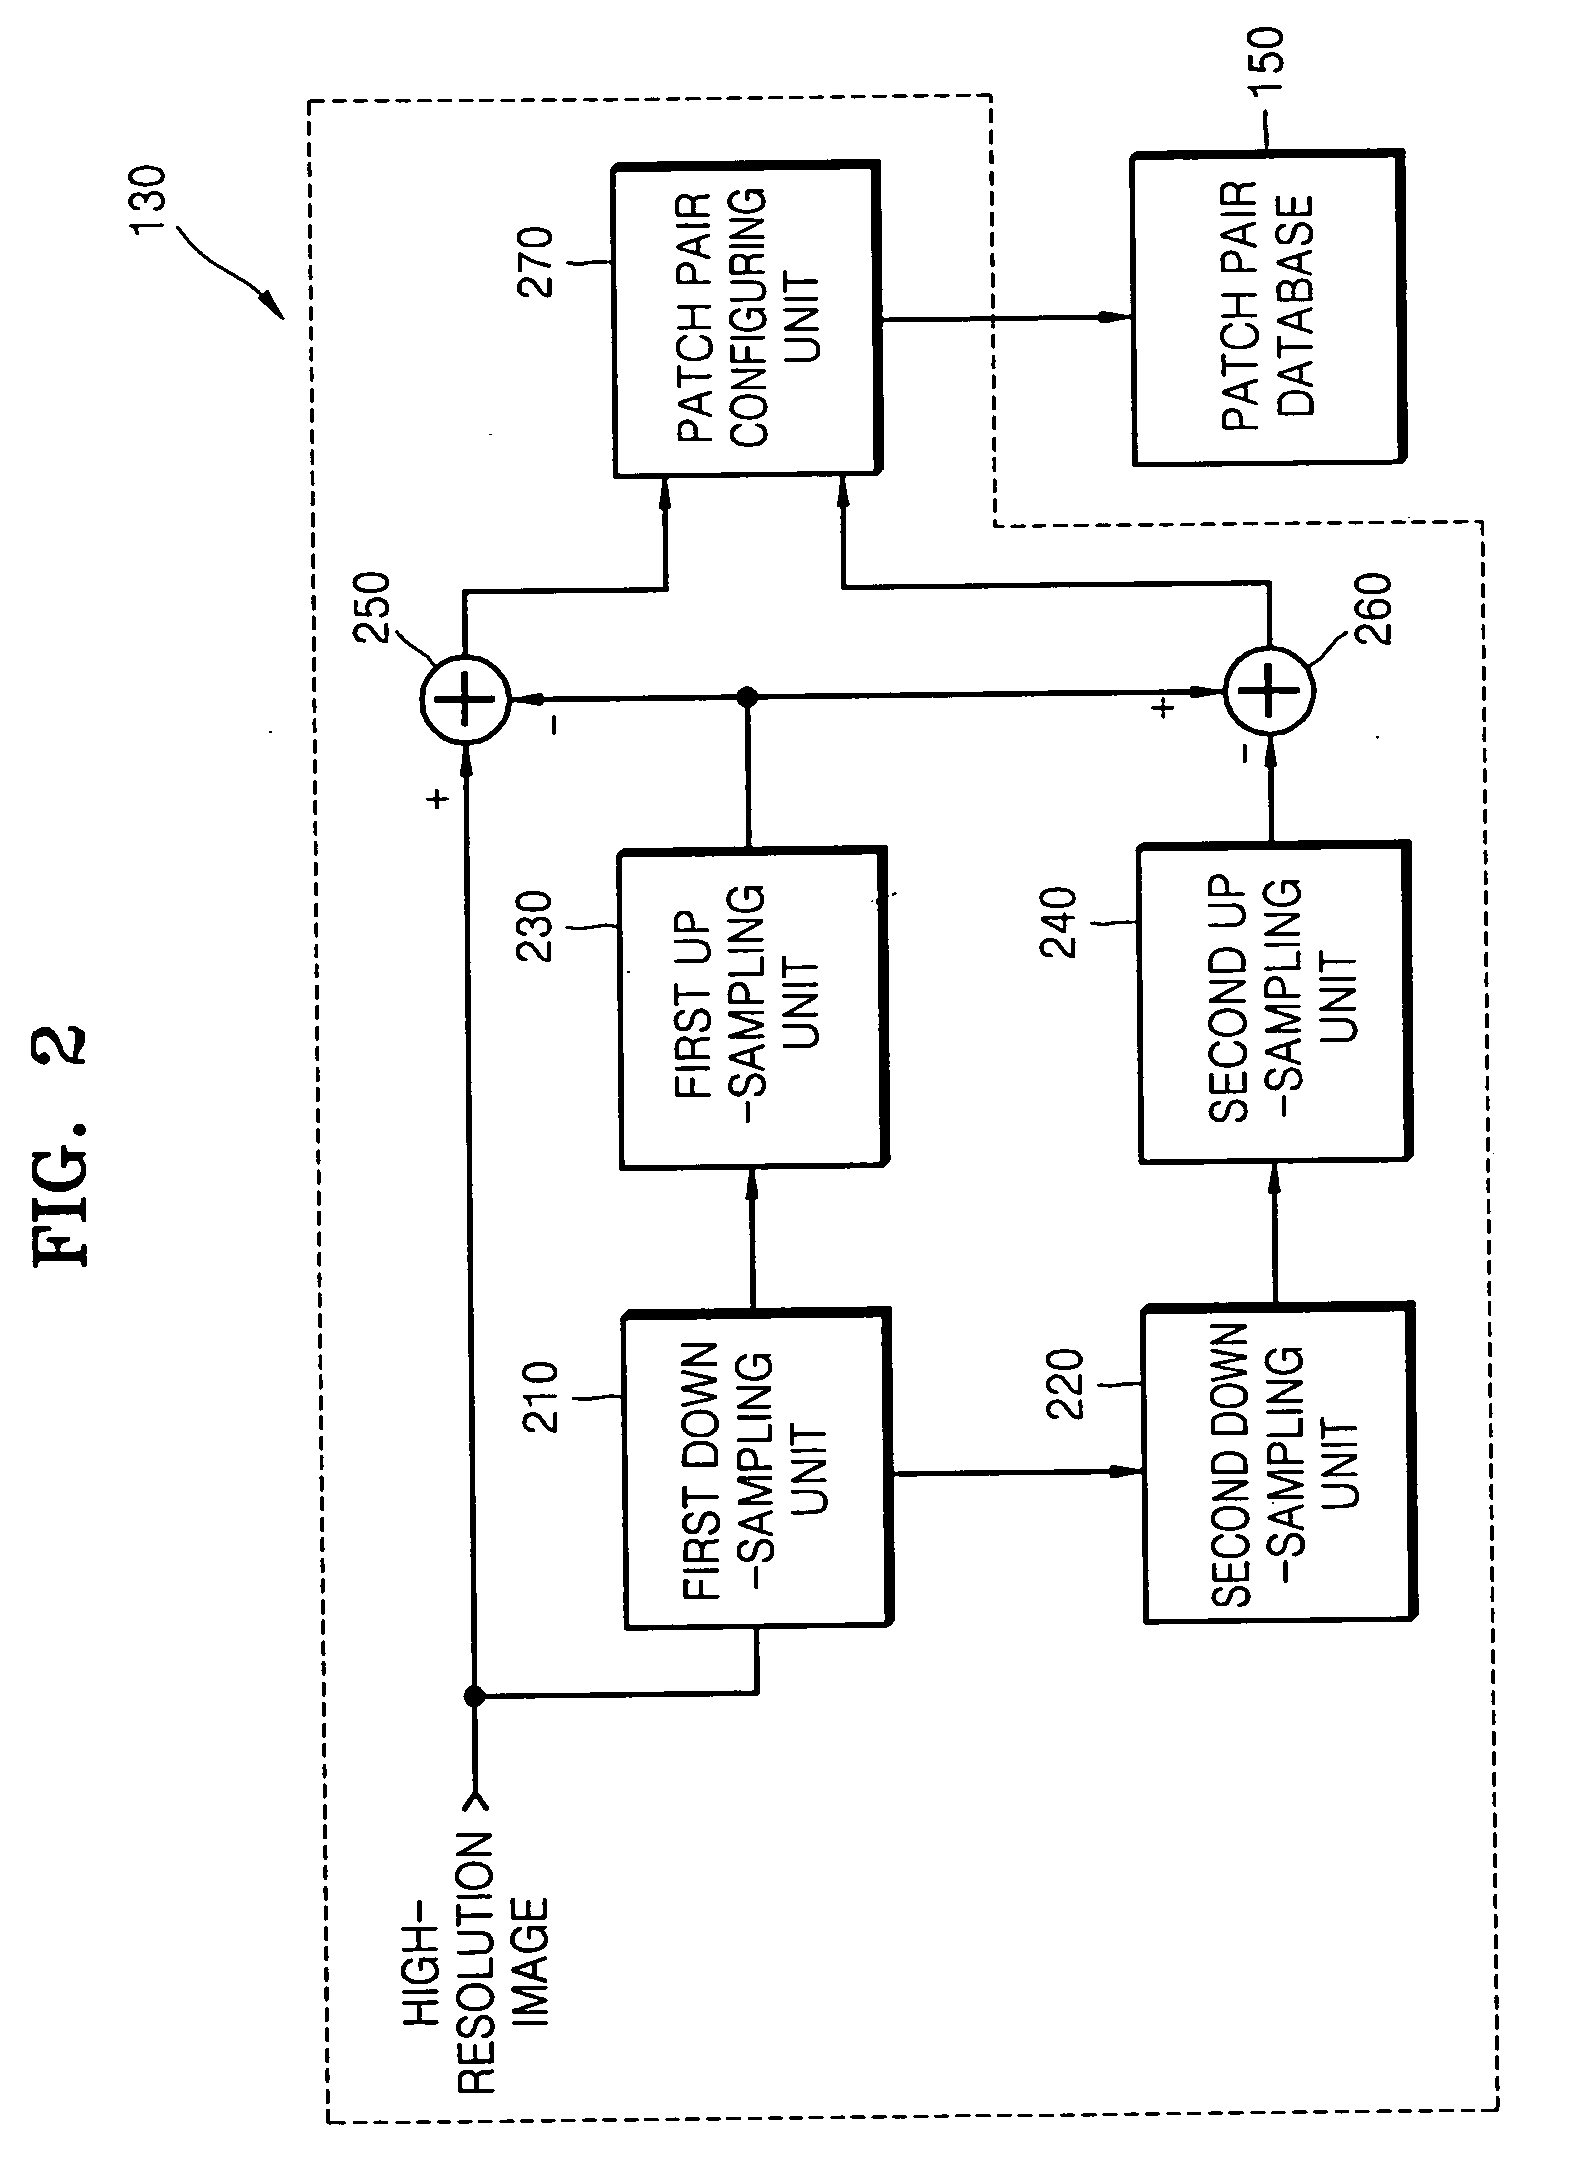 Apparatus and method for super-resolution enhancement processing